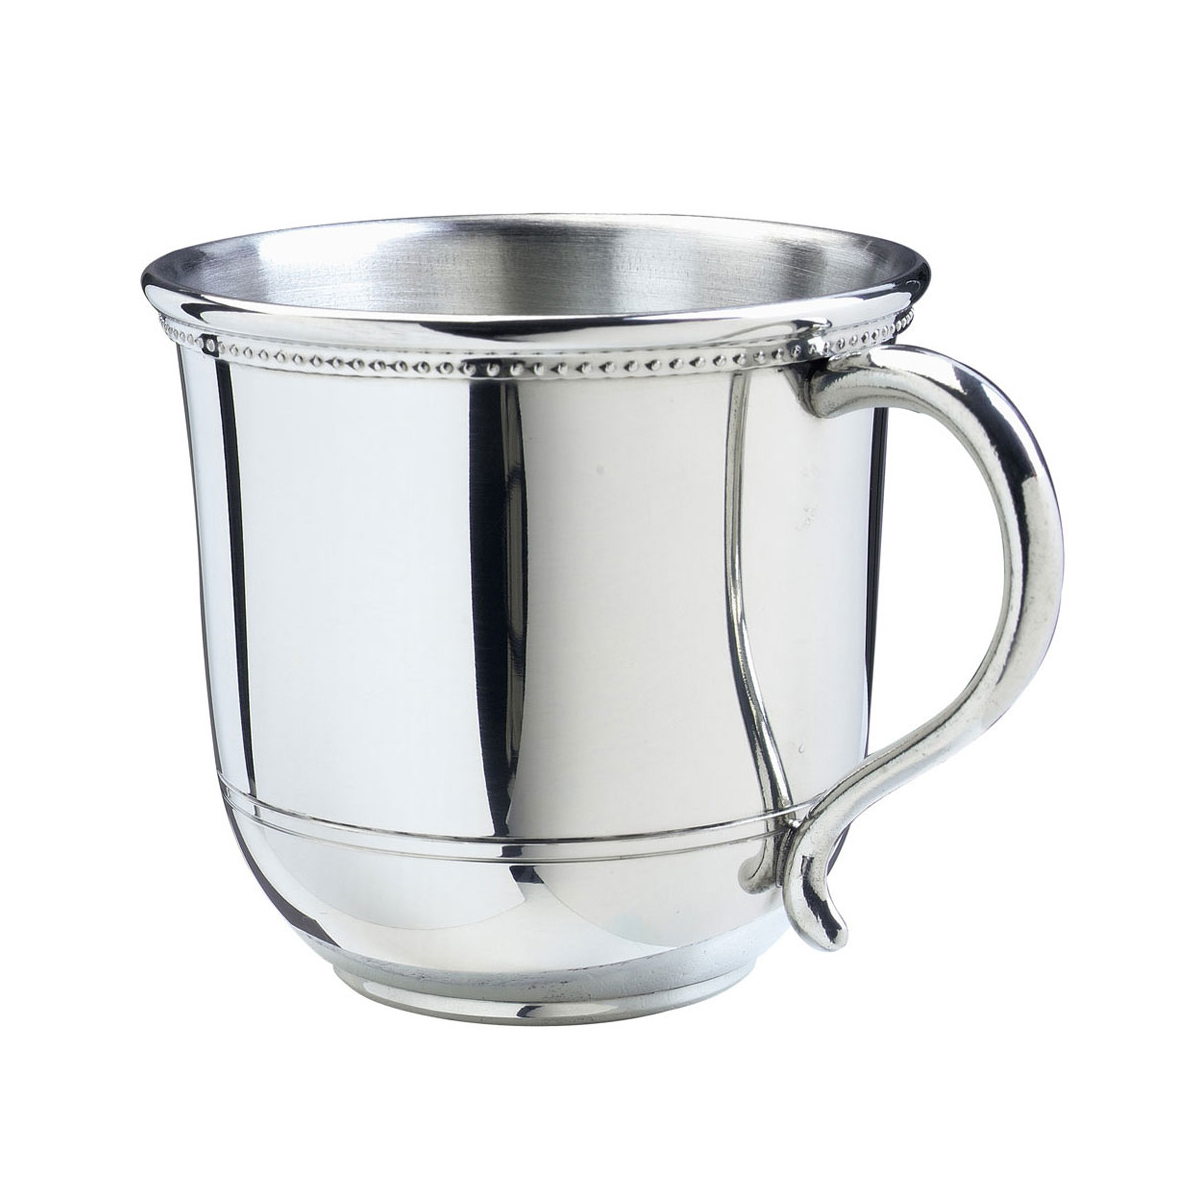 Images of America Pewter Baby Cup